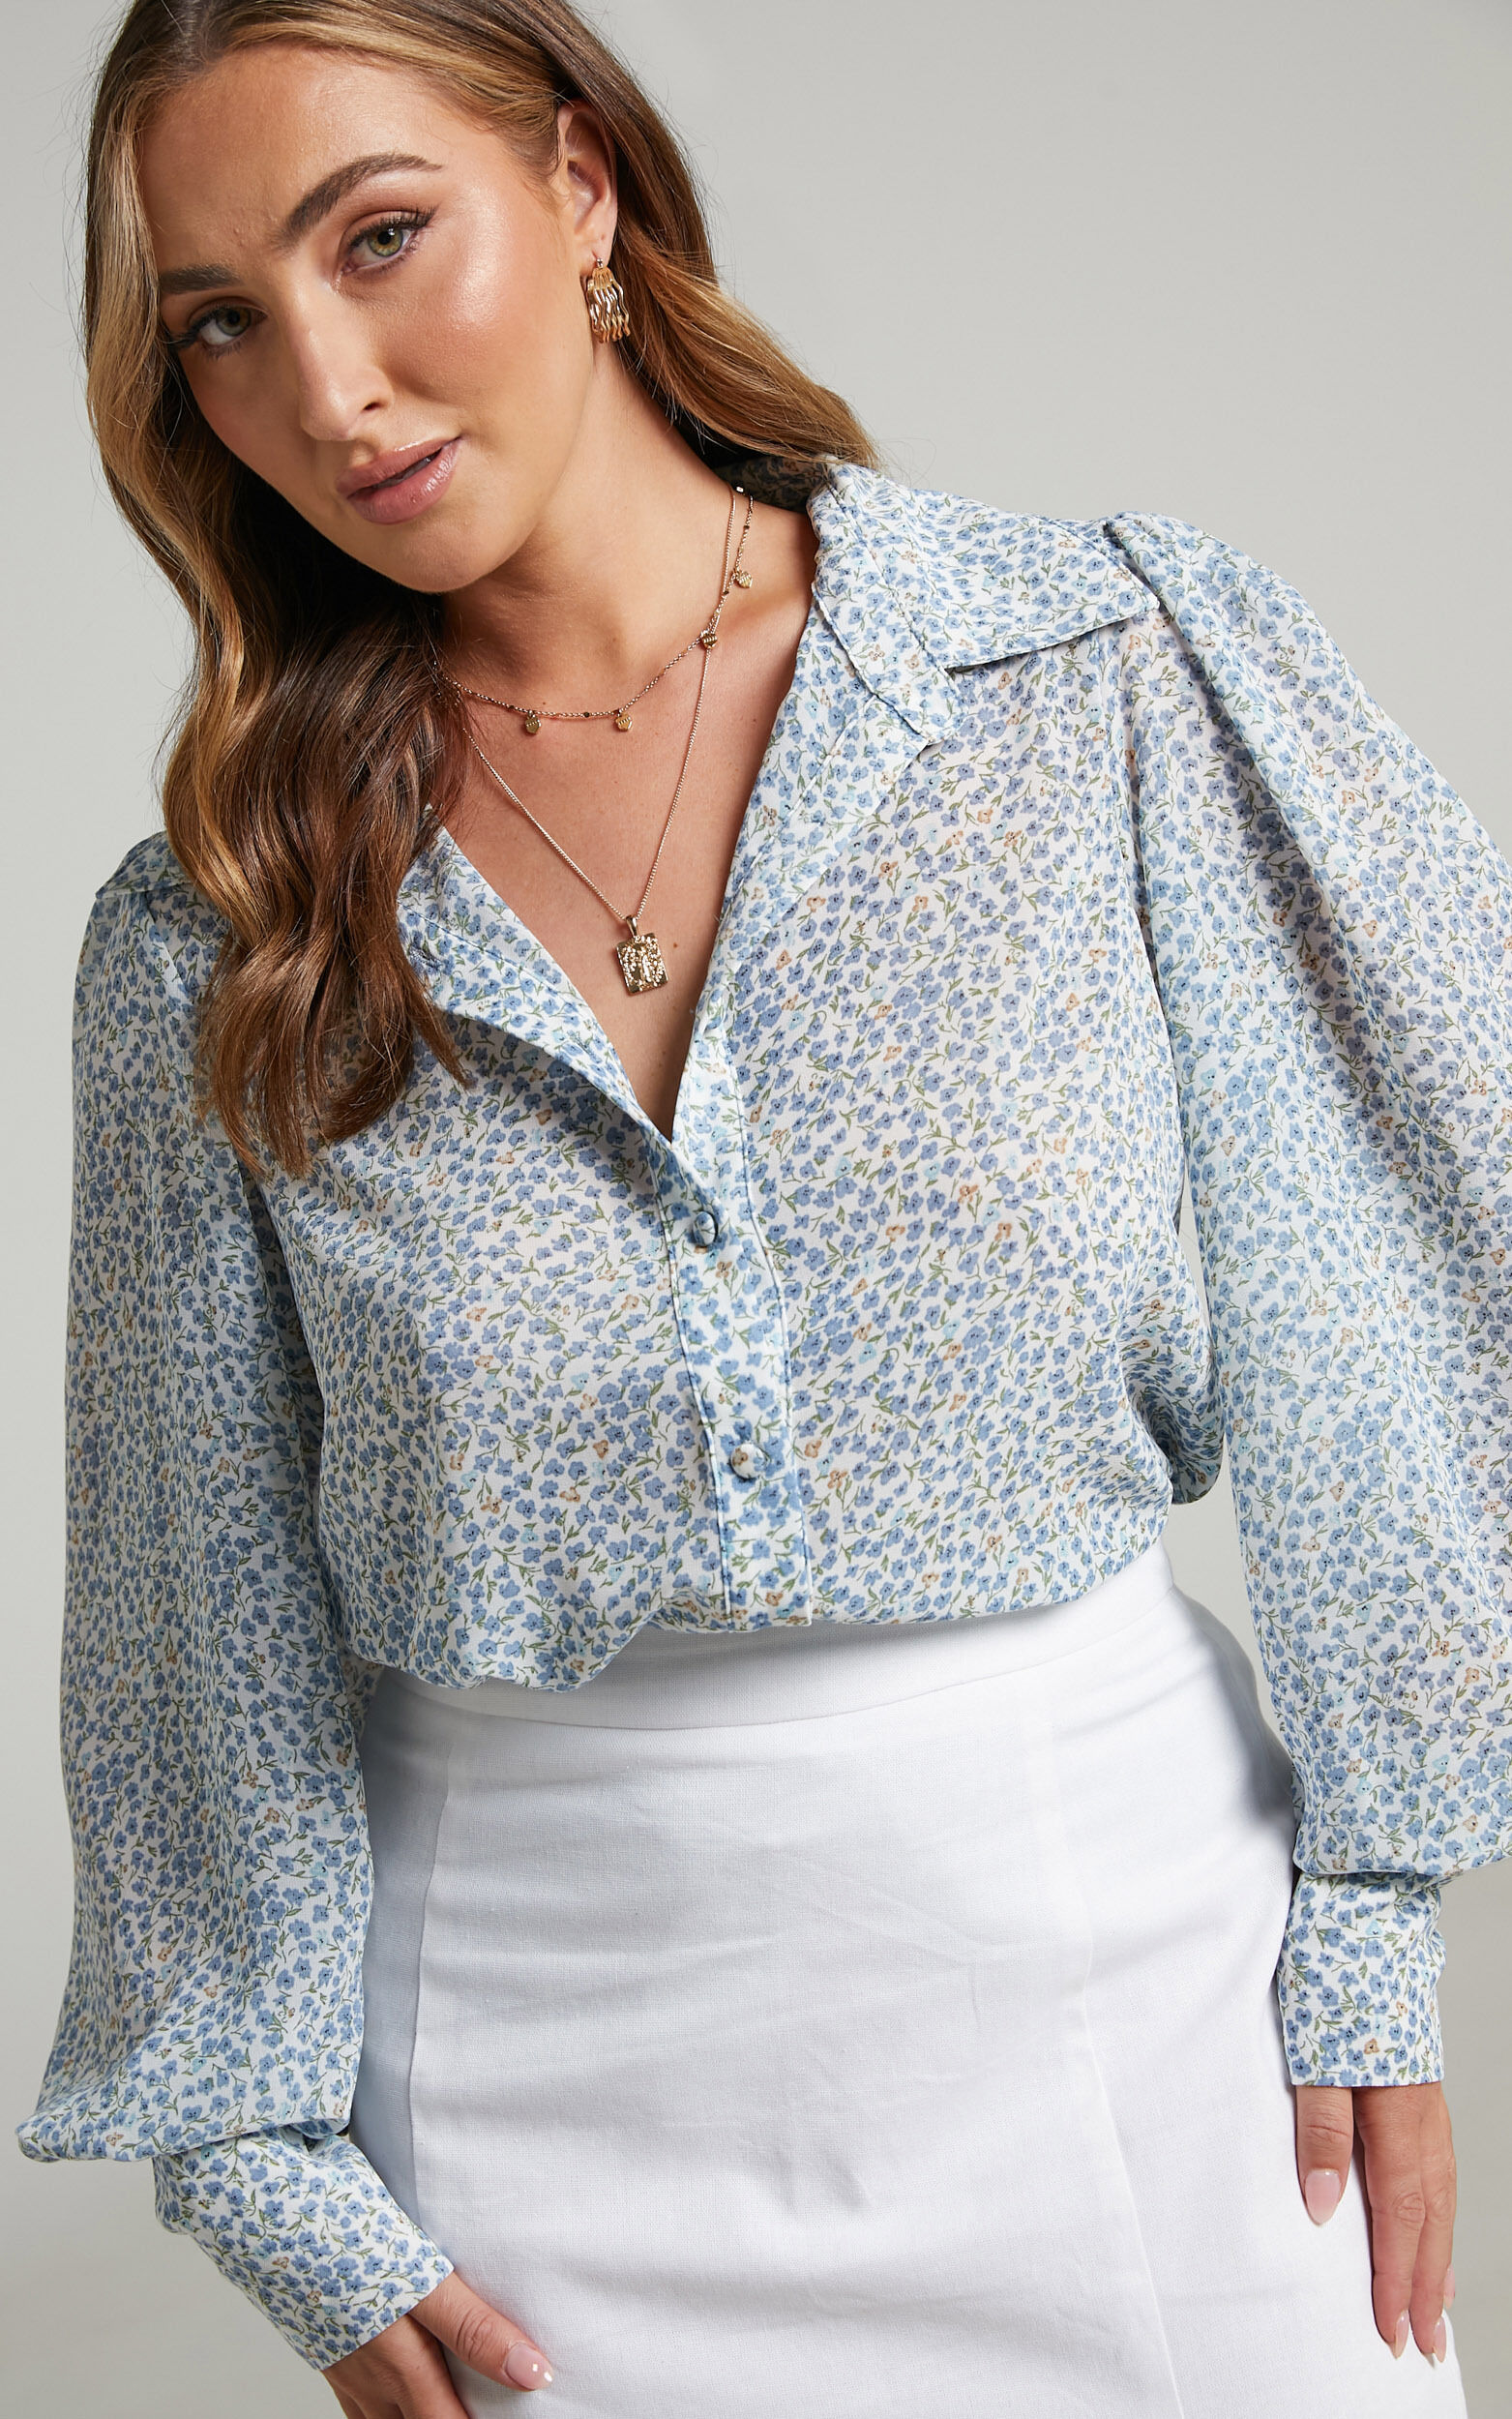 Nerizza Collared Bishop Sleeve Blouse in Dainty Floral - 06, BLU1, super-hi-res image number null